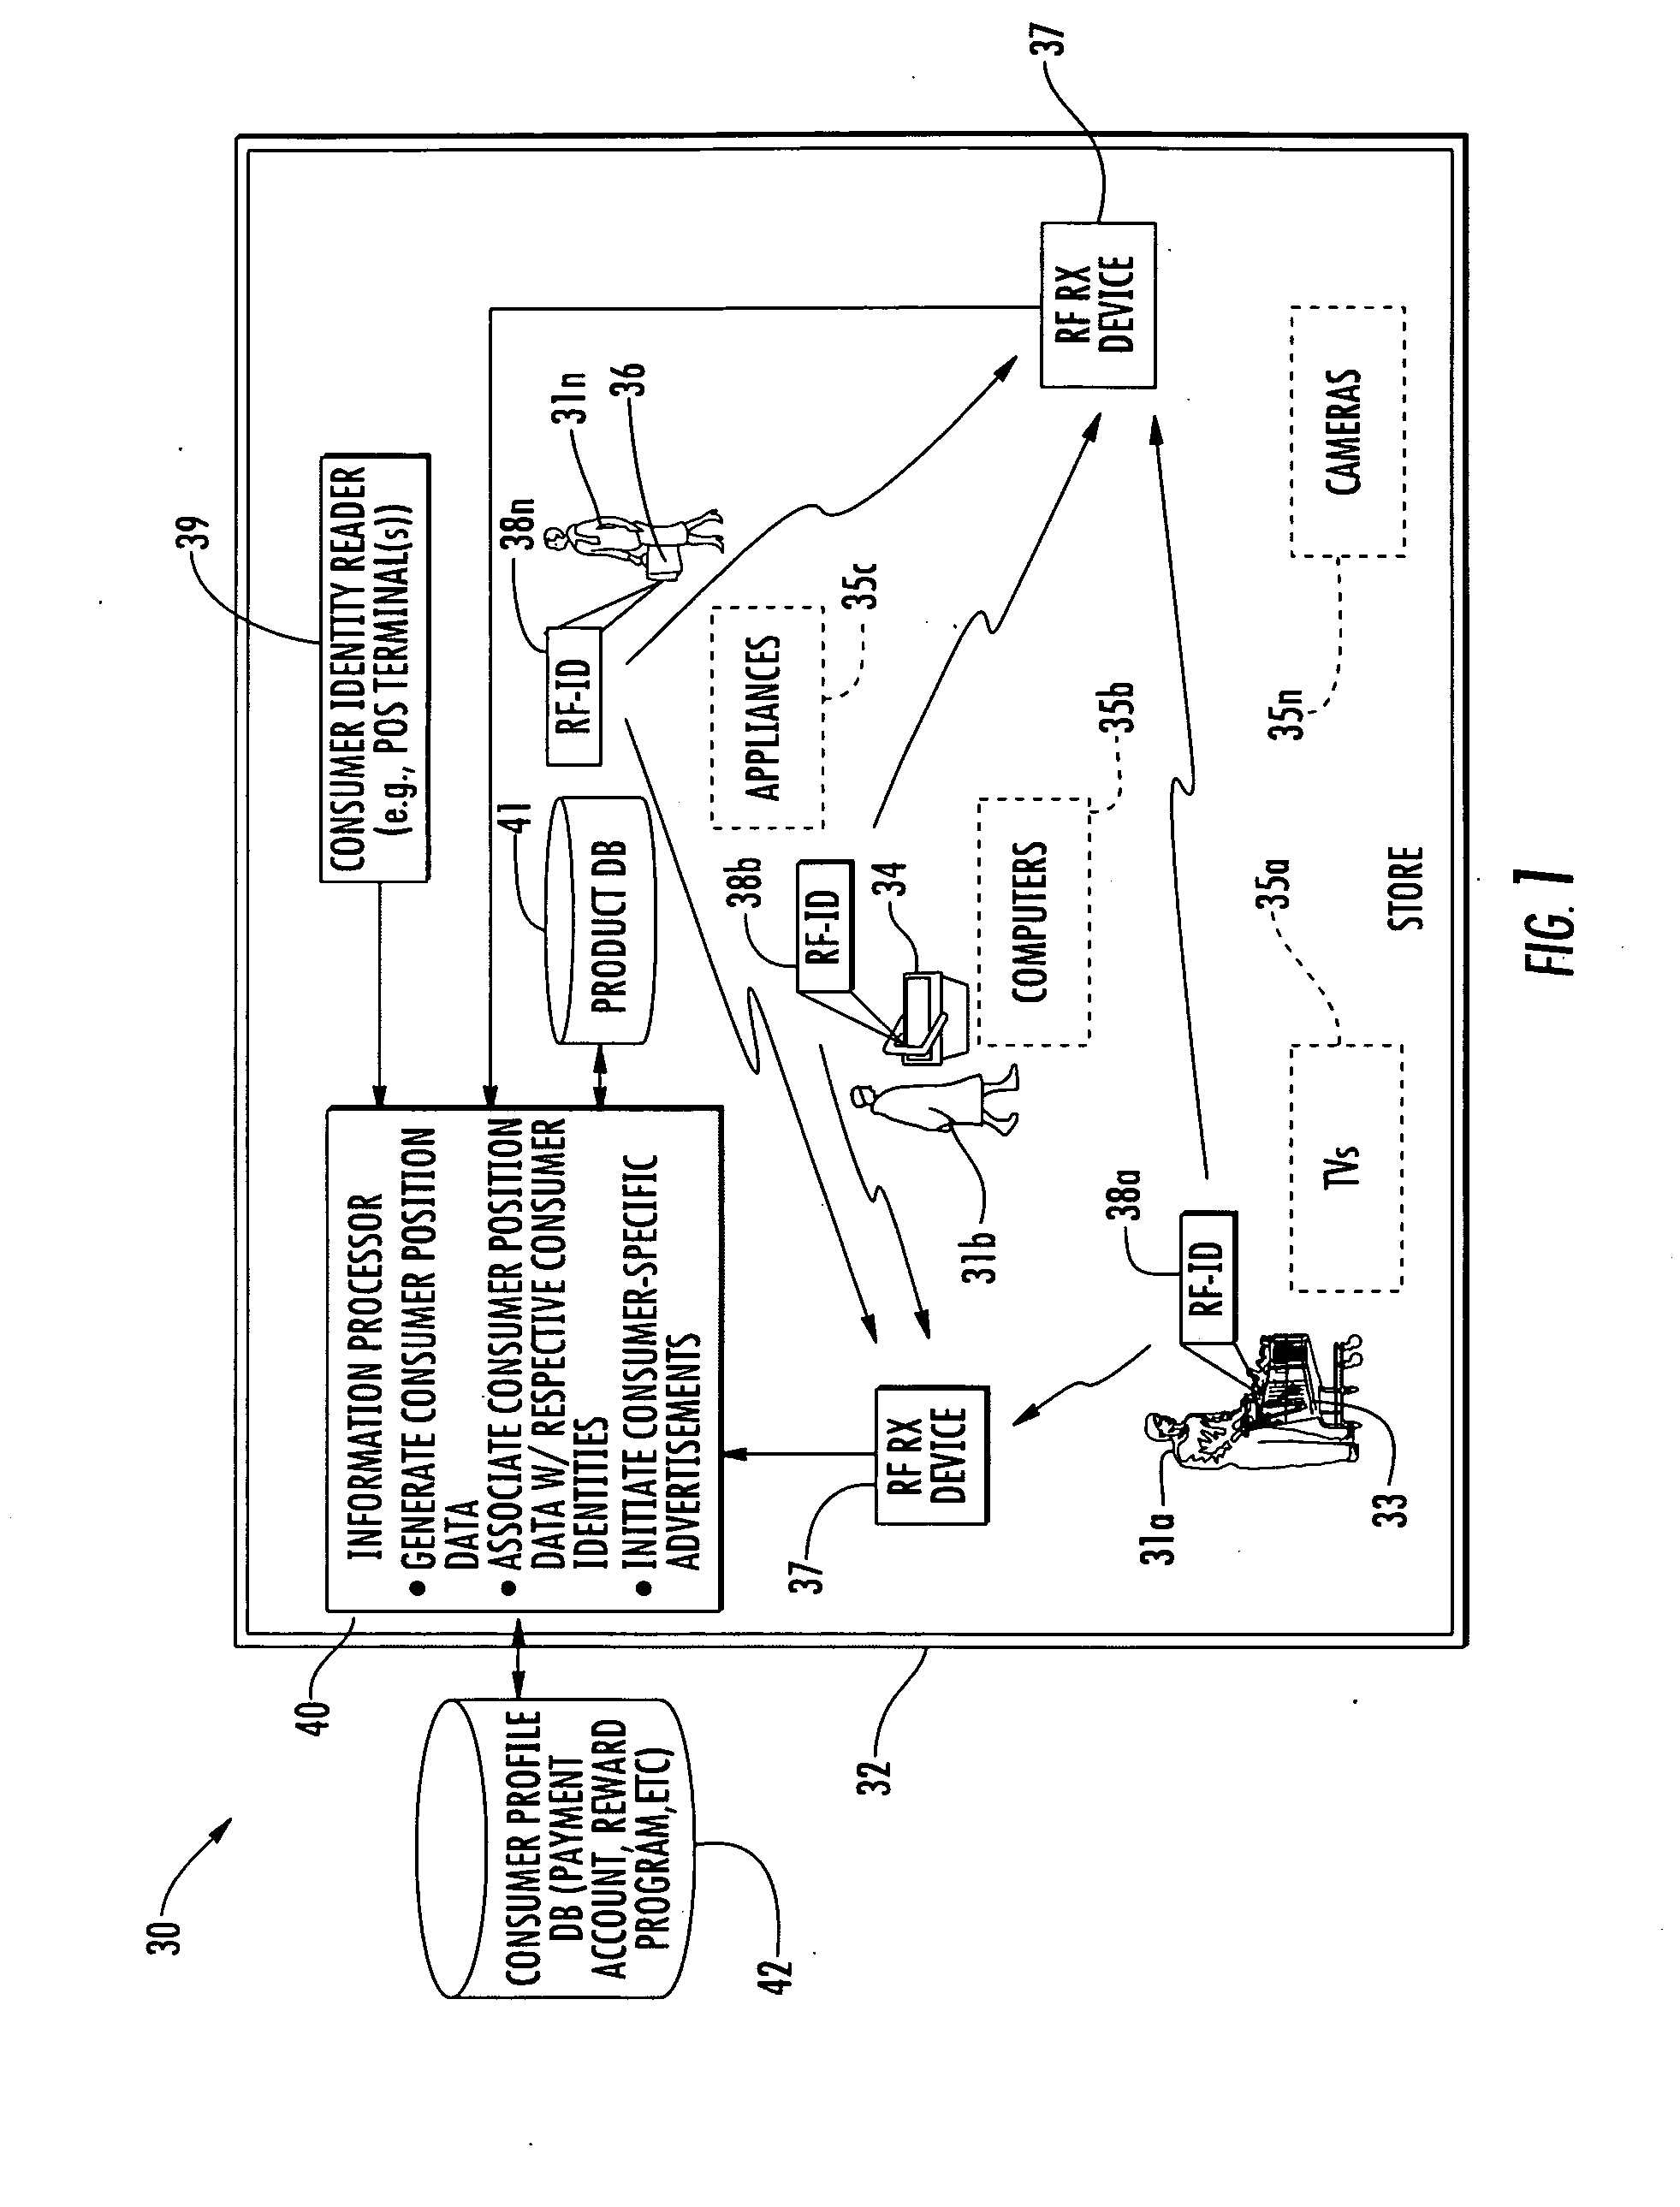 Information processing system for a store providing consumer-specific advertisement features and related methods